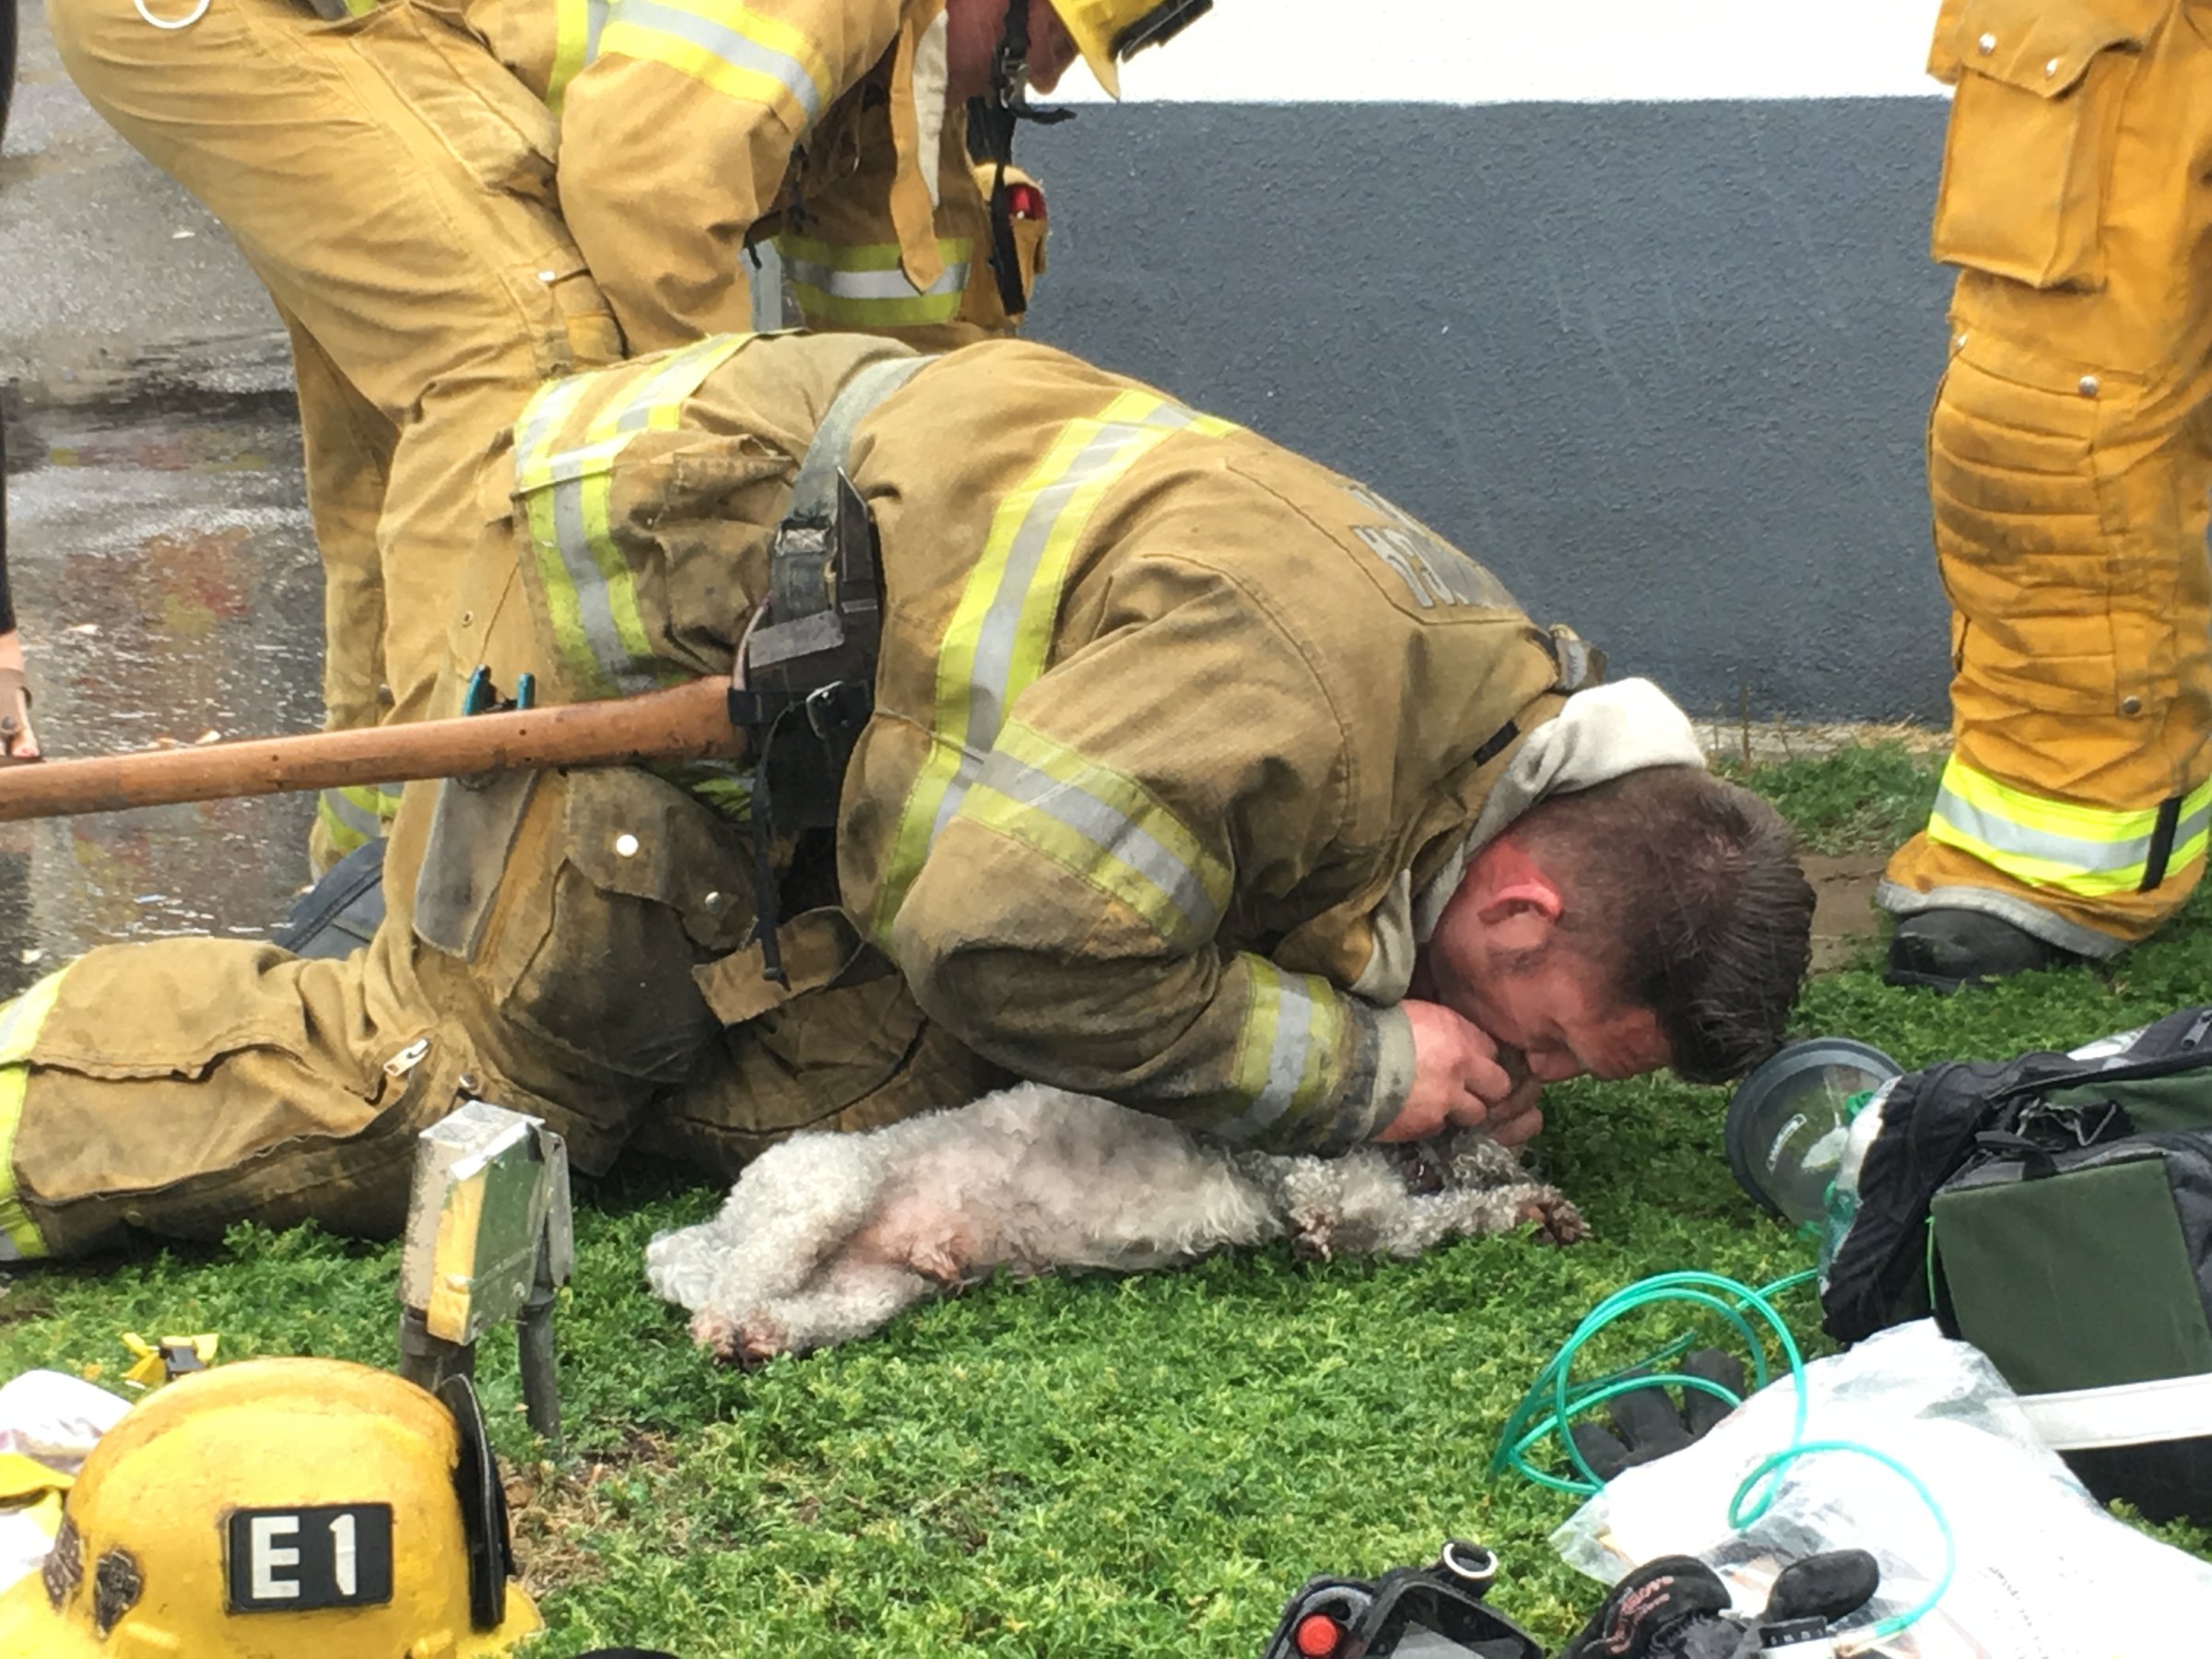 A Santa Monica firefighter resuscitated a dog after performing CPR on it following an apartment fire.